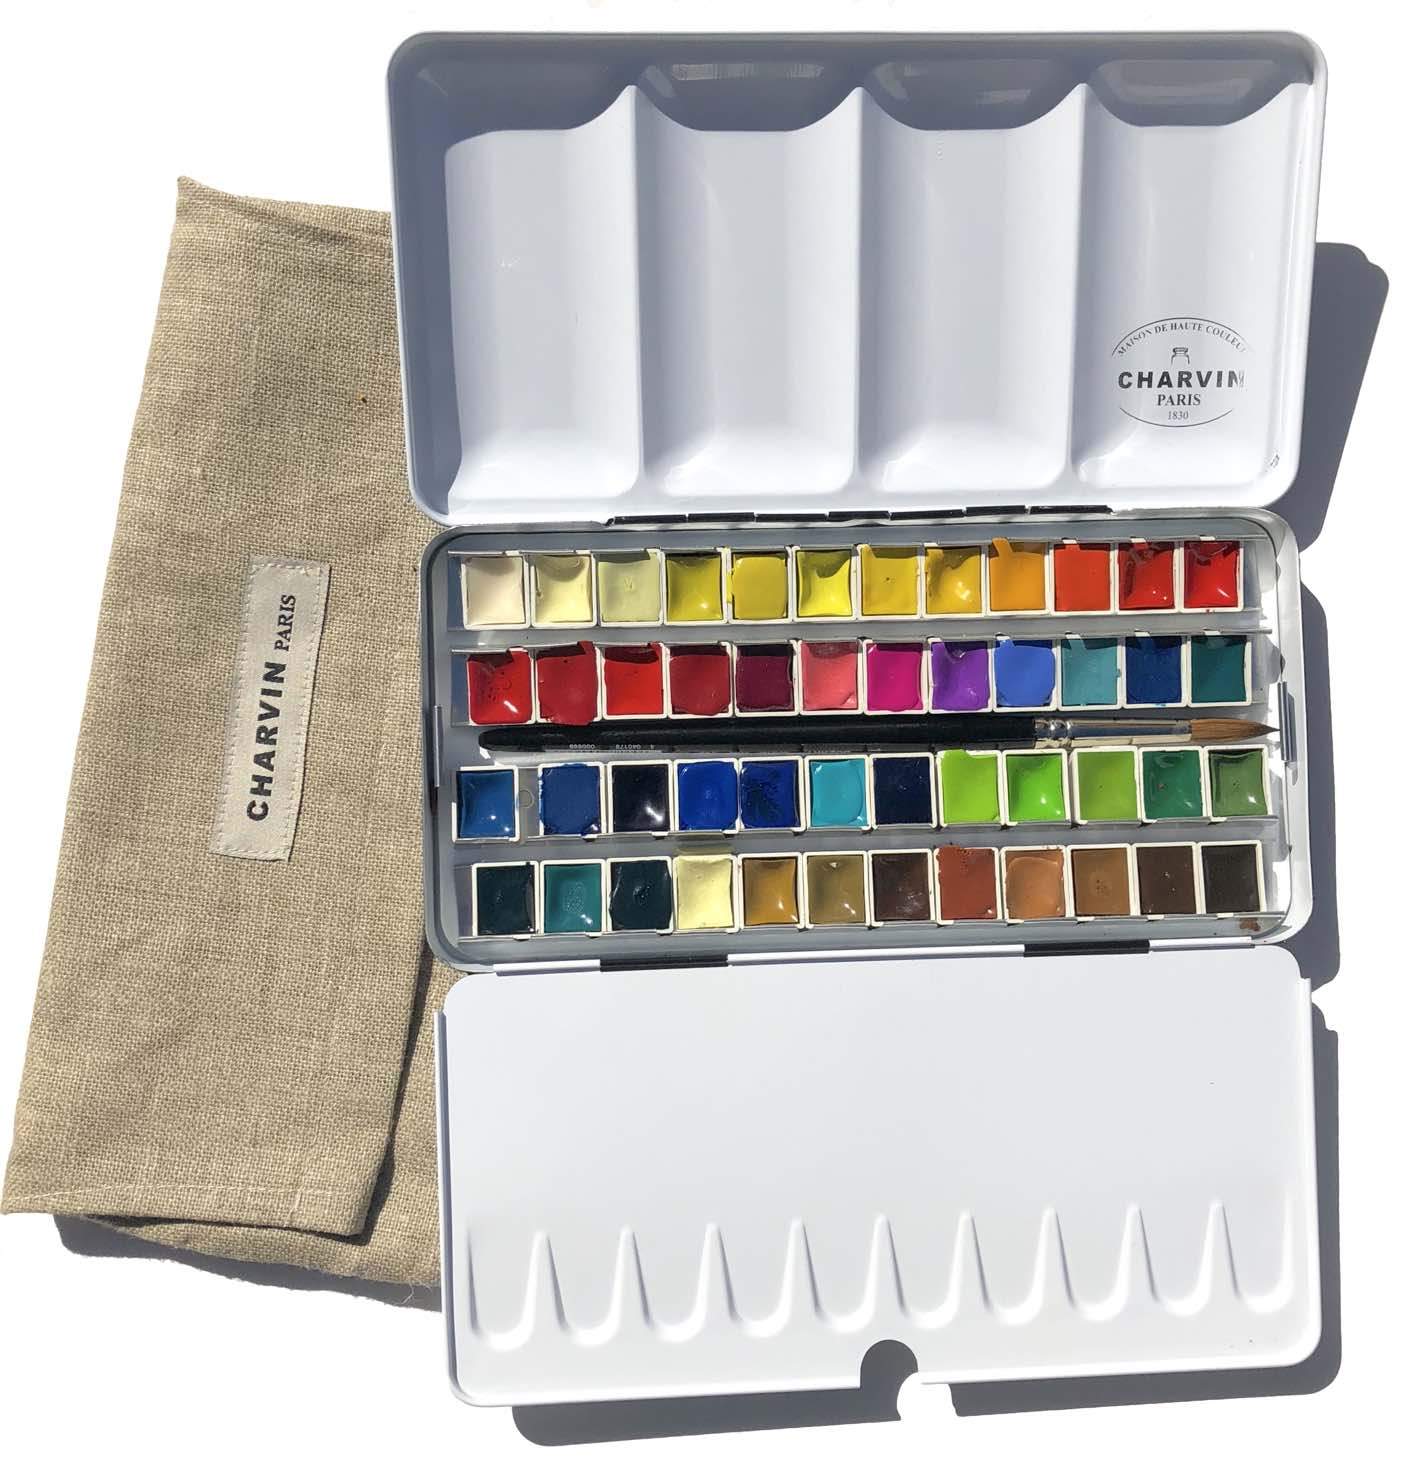 Charvin Sets of Extra-Fine Professional Acrylic Paint